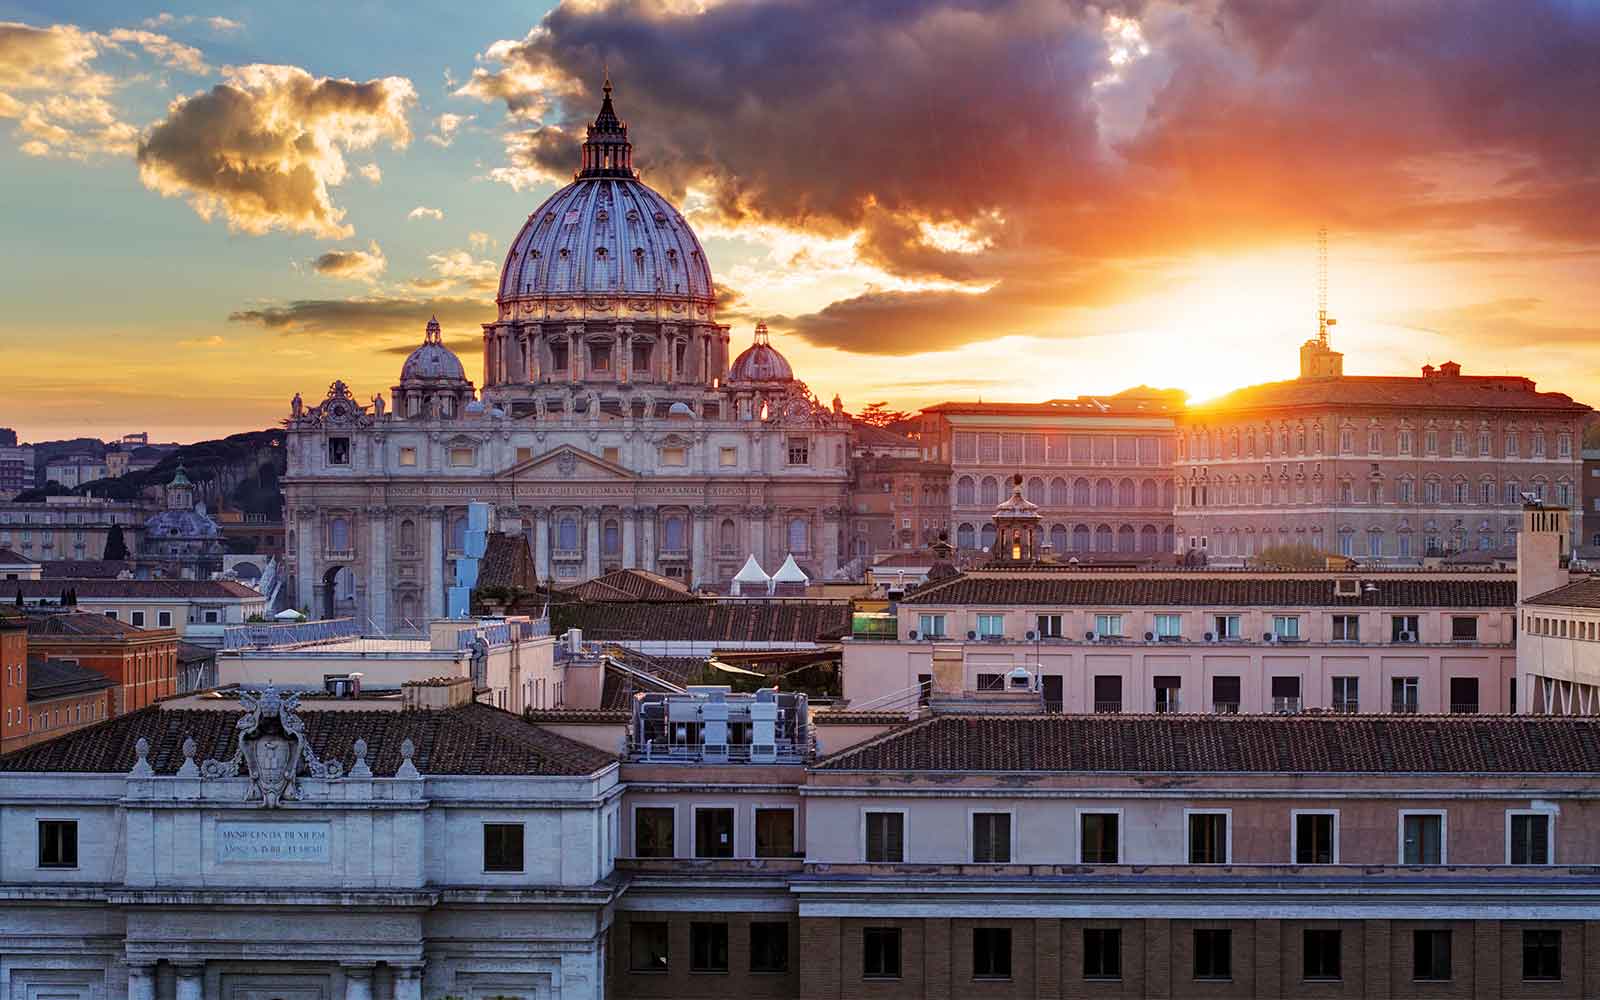 7.2 The Belvedere Court of the Vatican Palace – subratachak